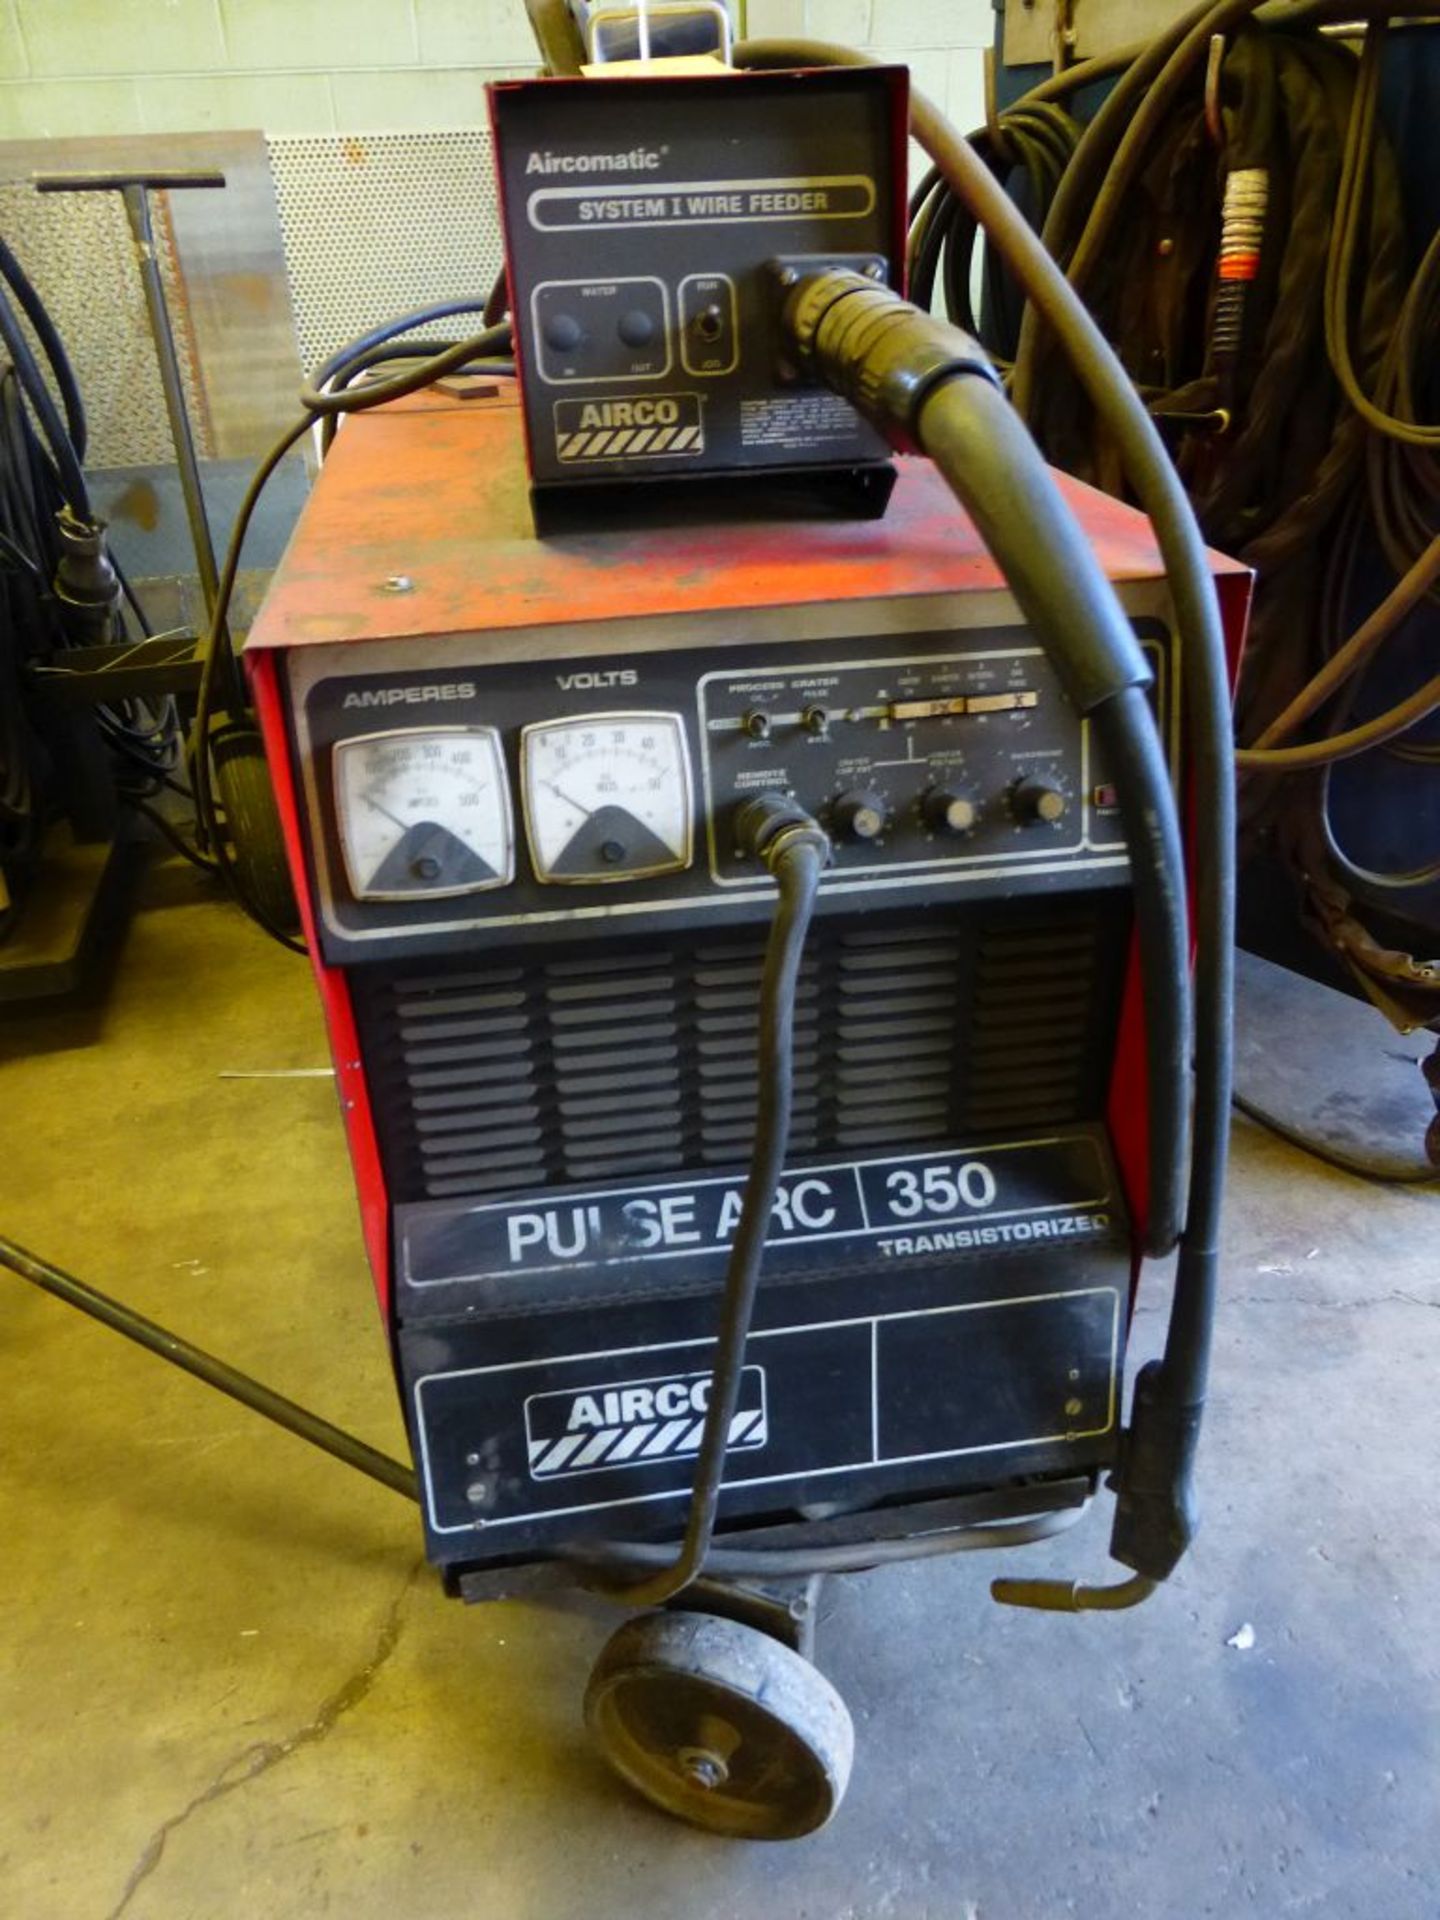 Airco Welder with w/Wire Feeder | (1) Airco Pulse Arc 350 Welder; Airco System I Wire Feeder - Image 3 of 6